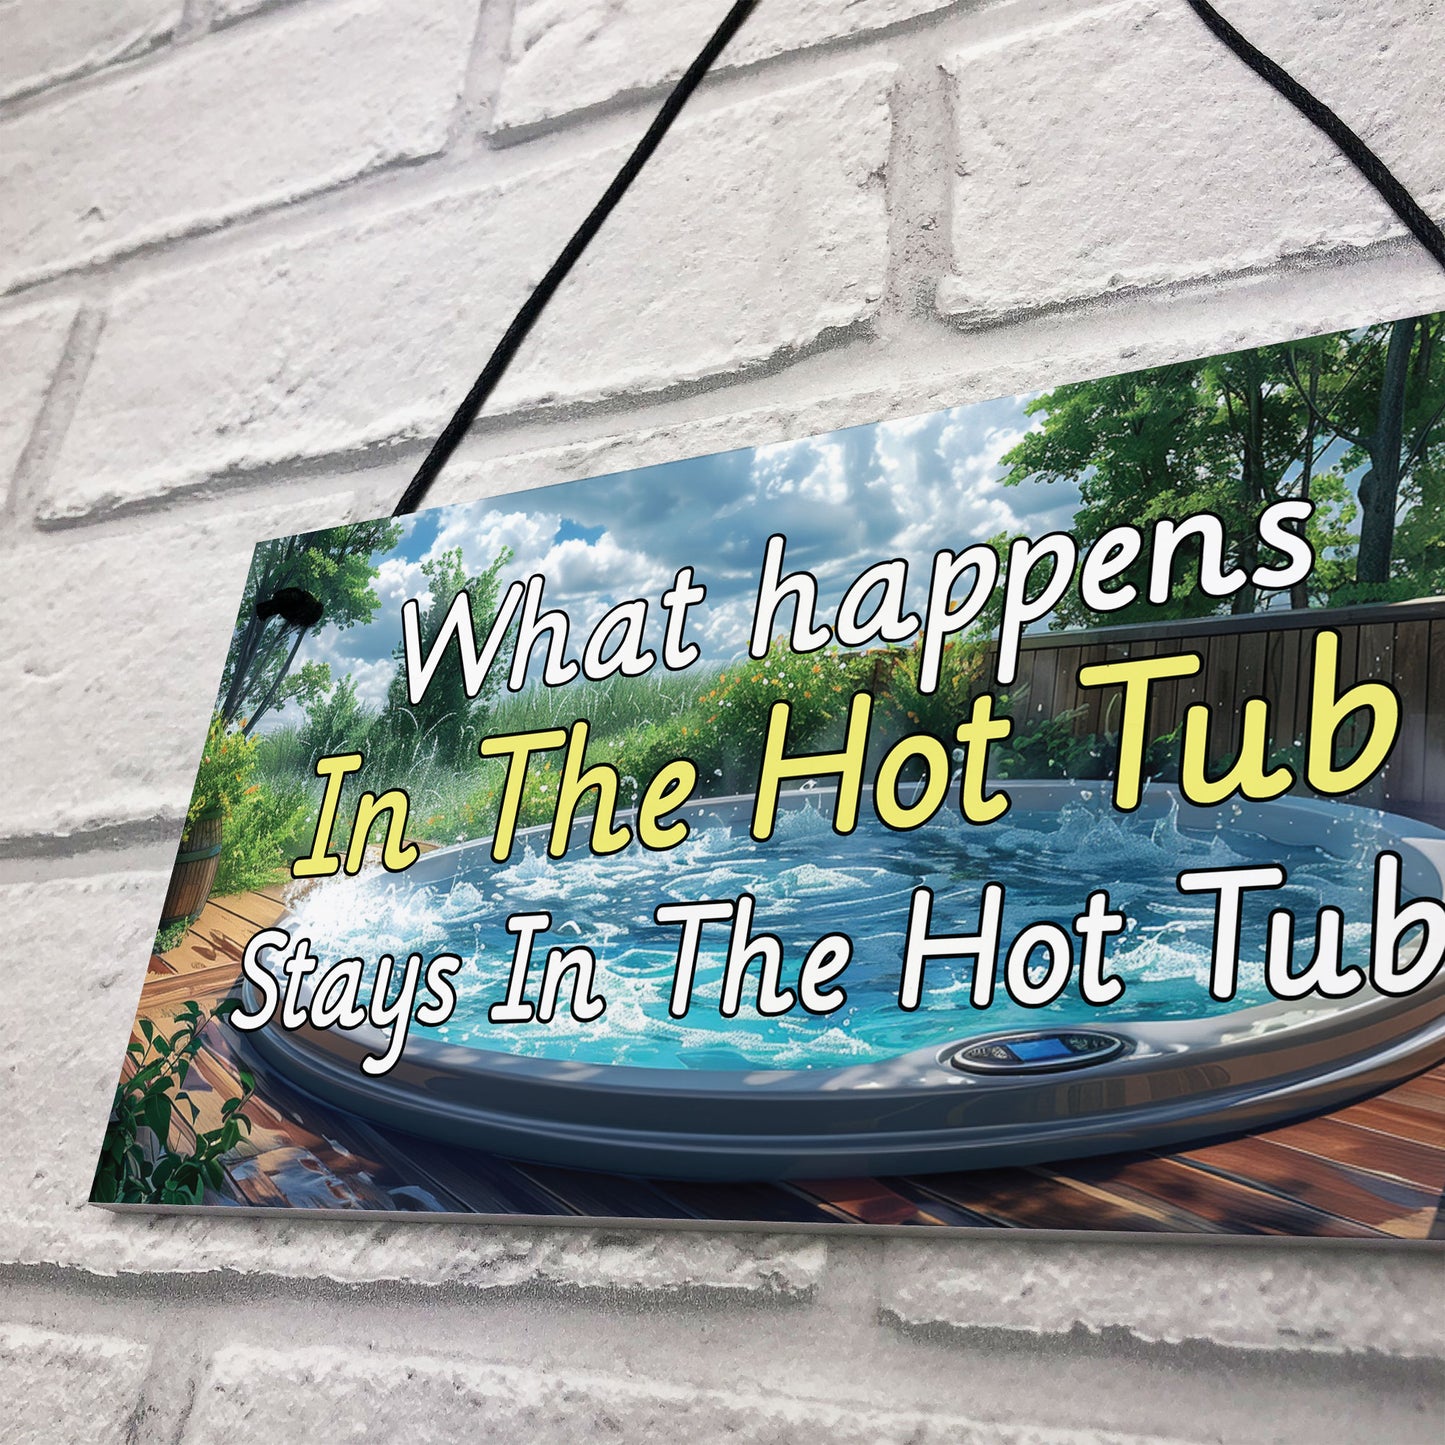 Funny Hot Tub Signs and Plaques Novelty Hot Tub Accessories